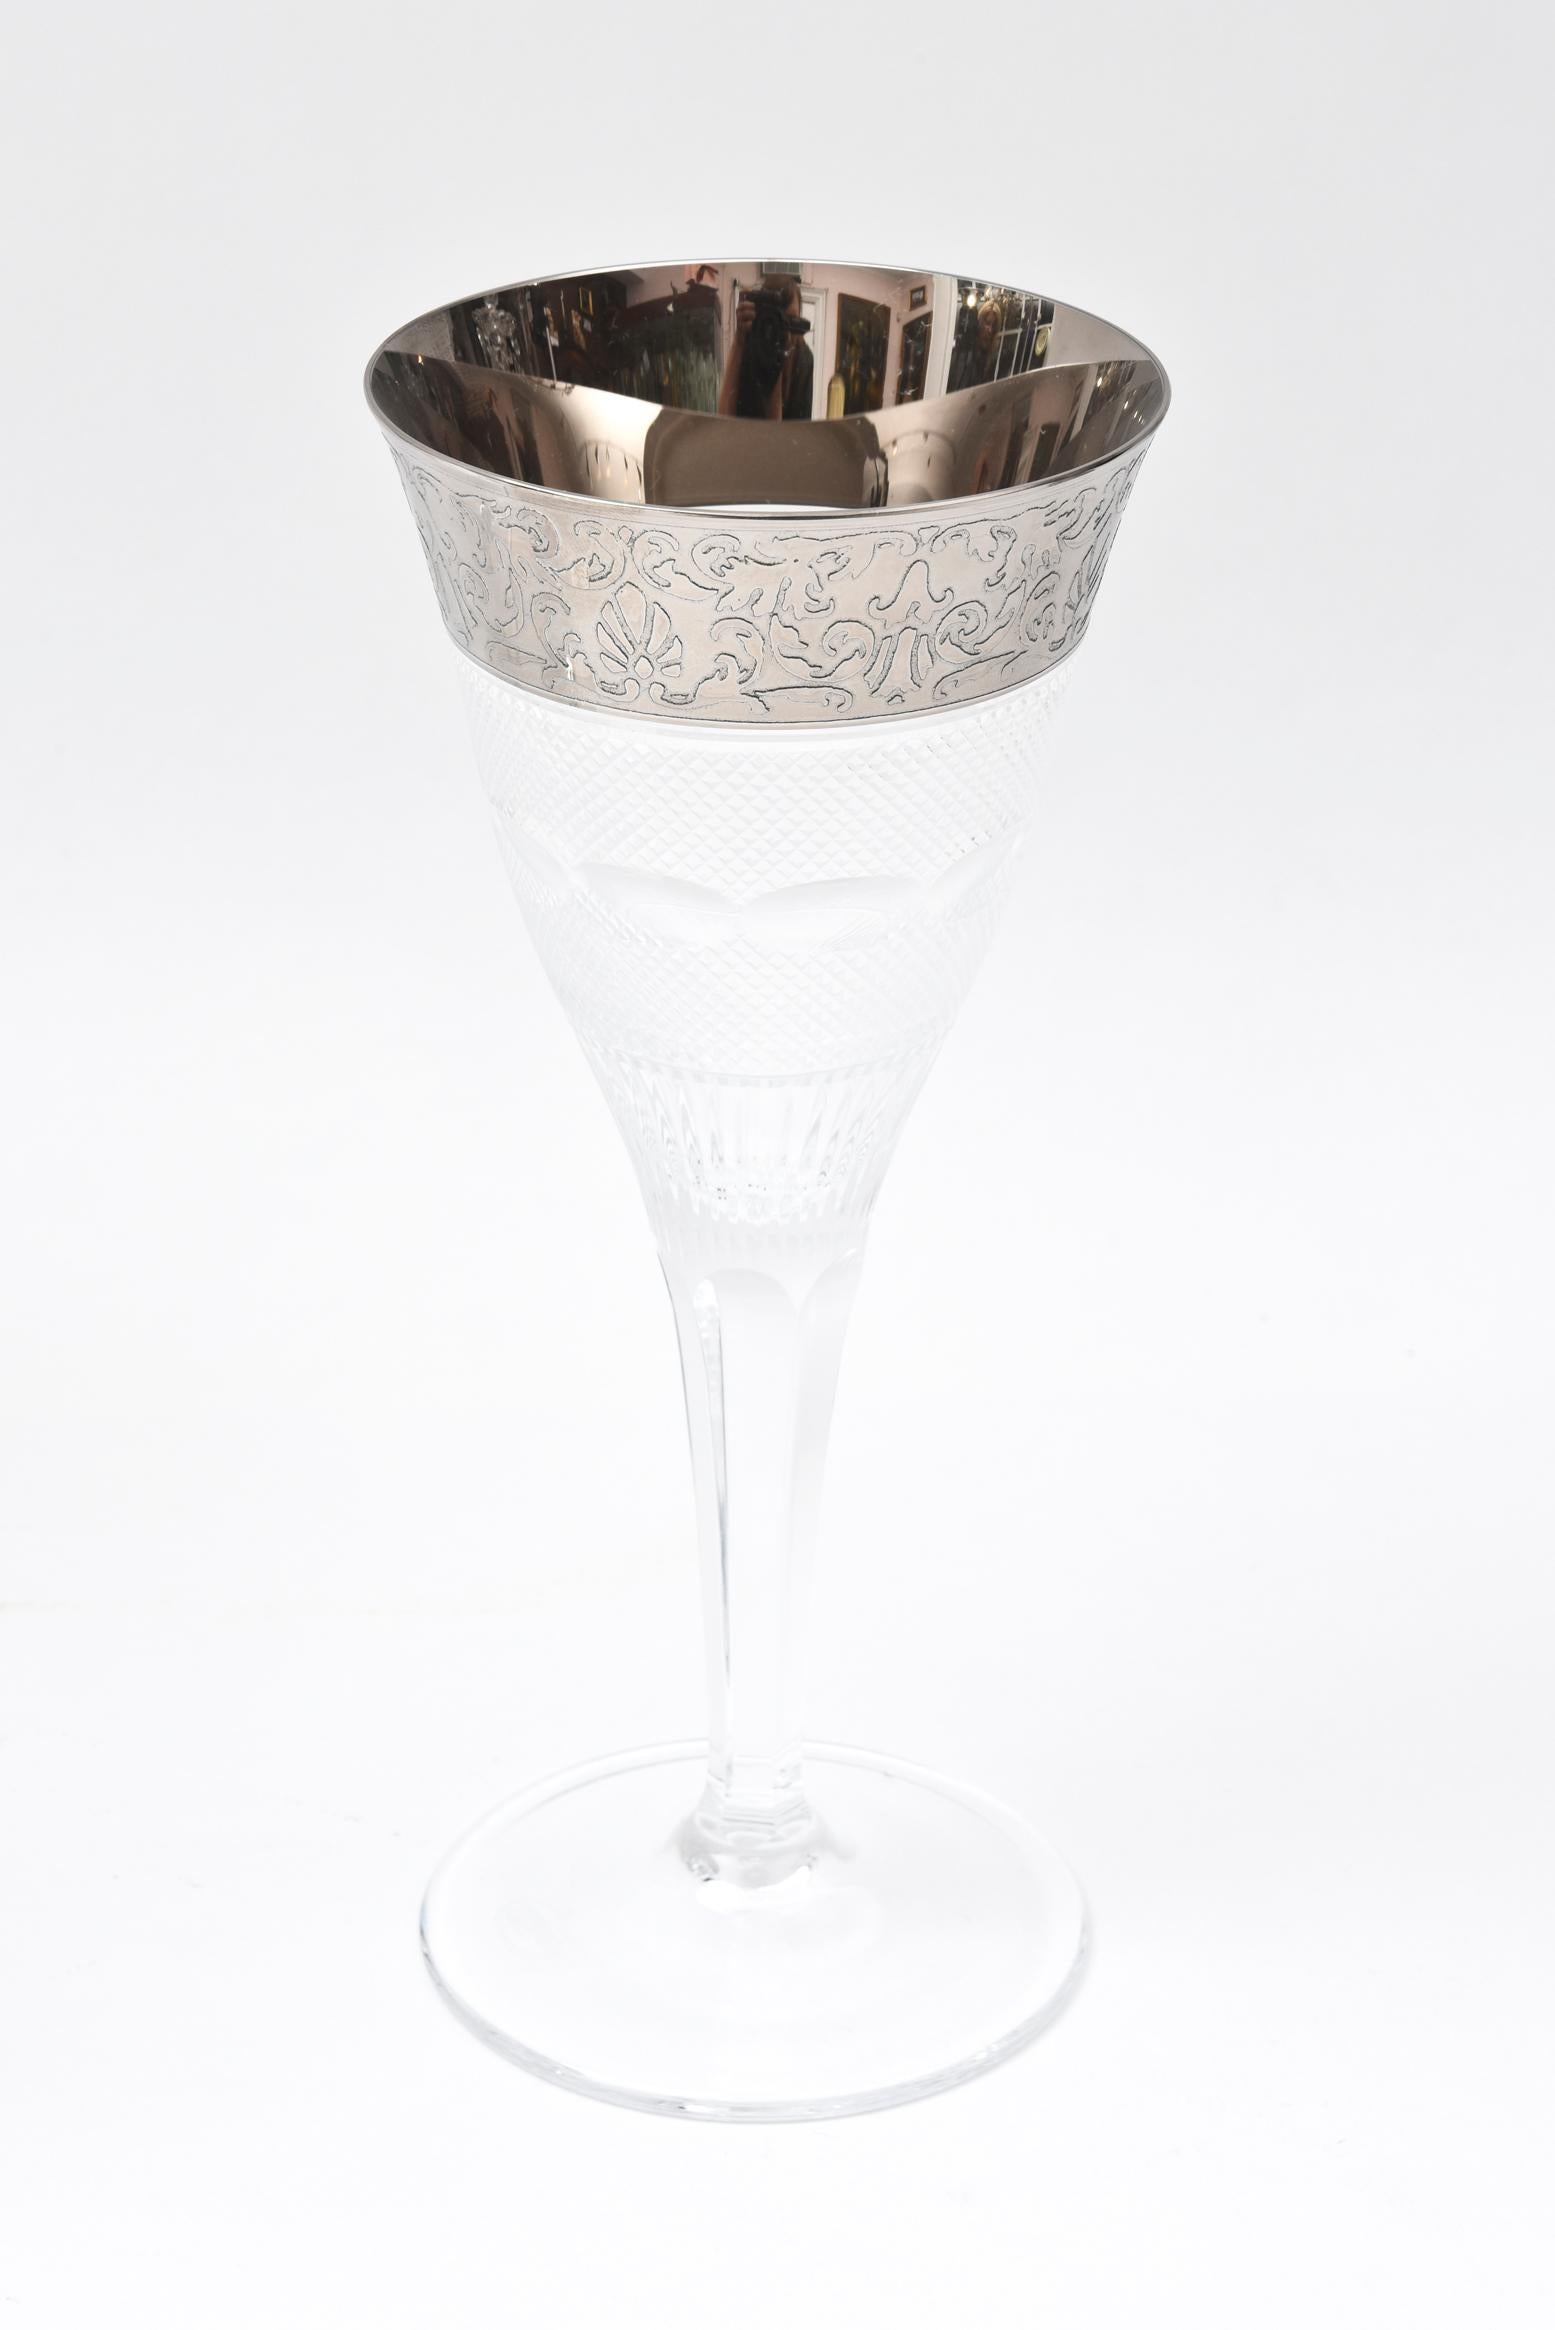 From one of our favorite glassmakers, Moser, we have 6 large goblets featuring a very wide floral engraved rich platinum banding. Nice and fully cut stem and bowl. Hallmarked and in very good vintage condition.